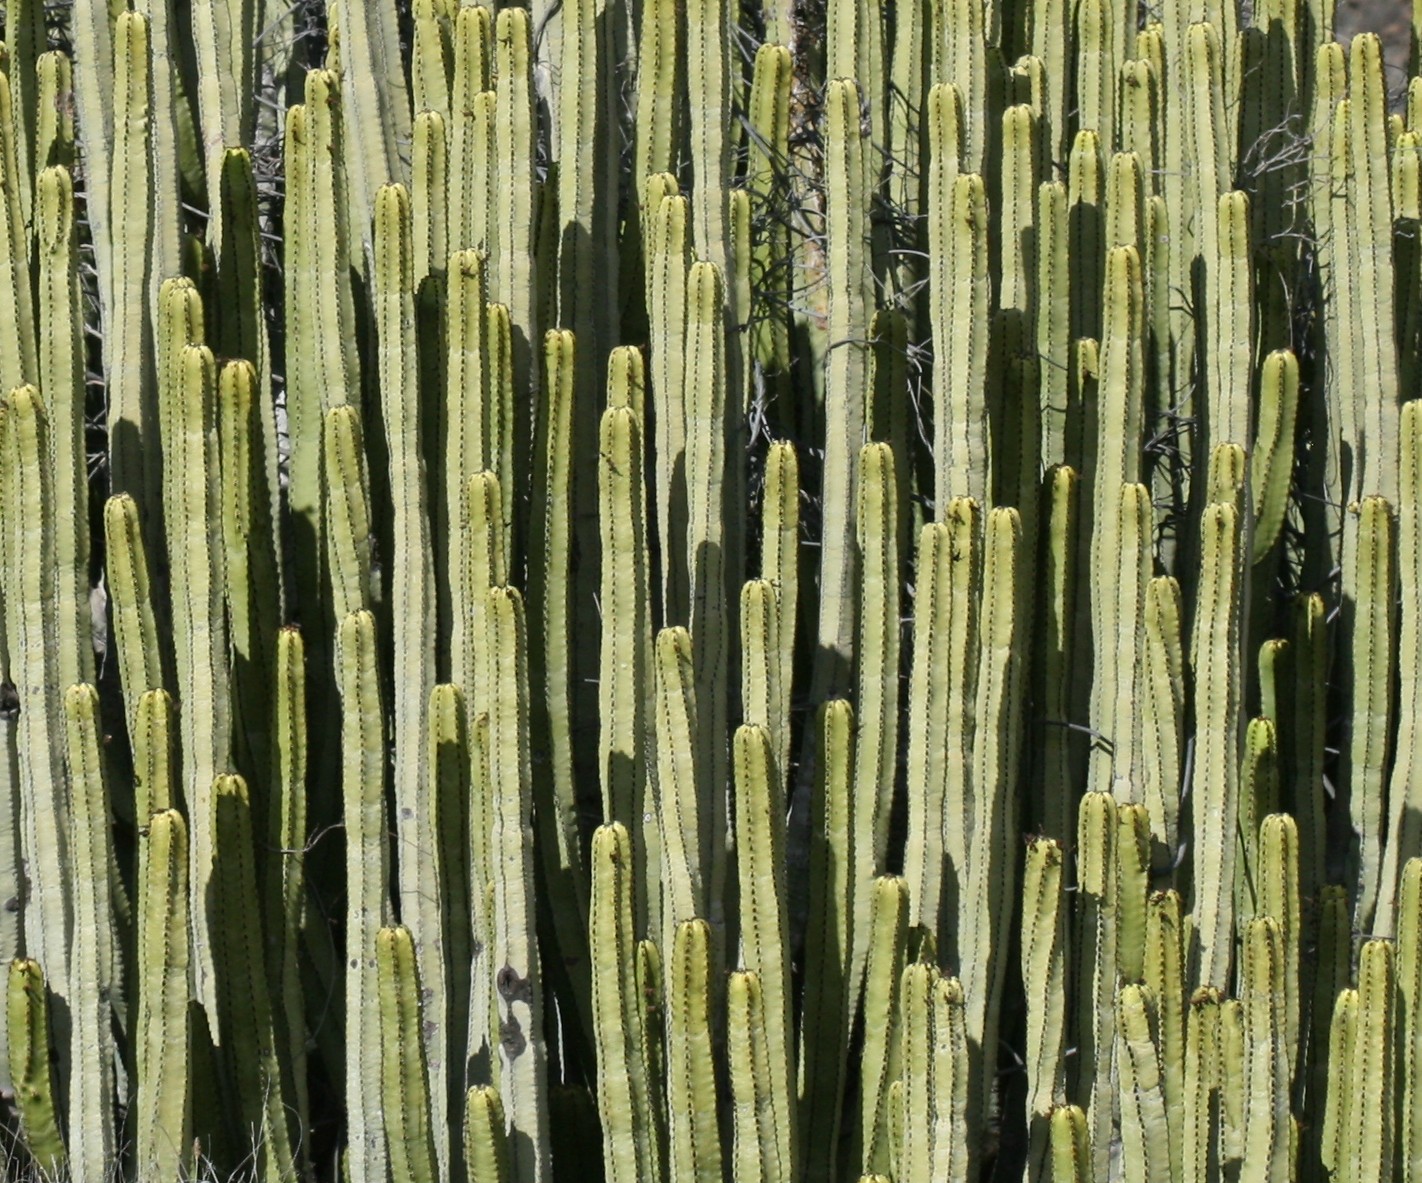 the large group of cactus has been very long and thin